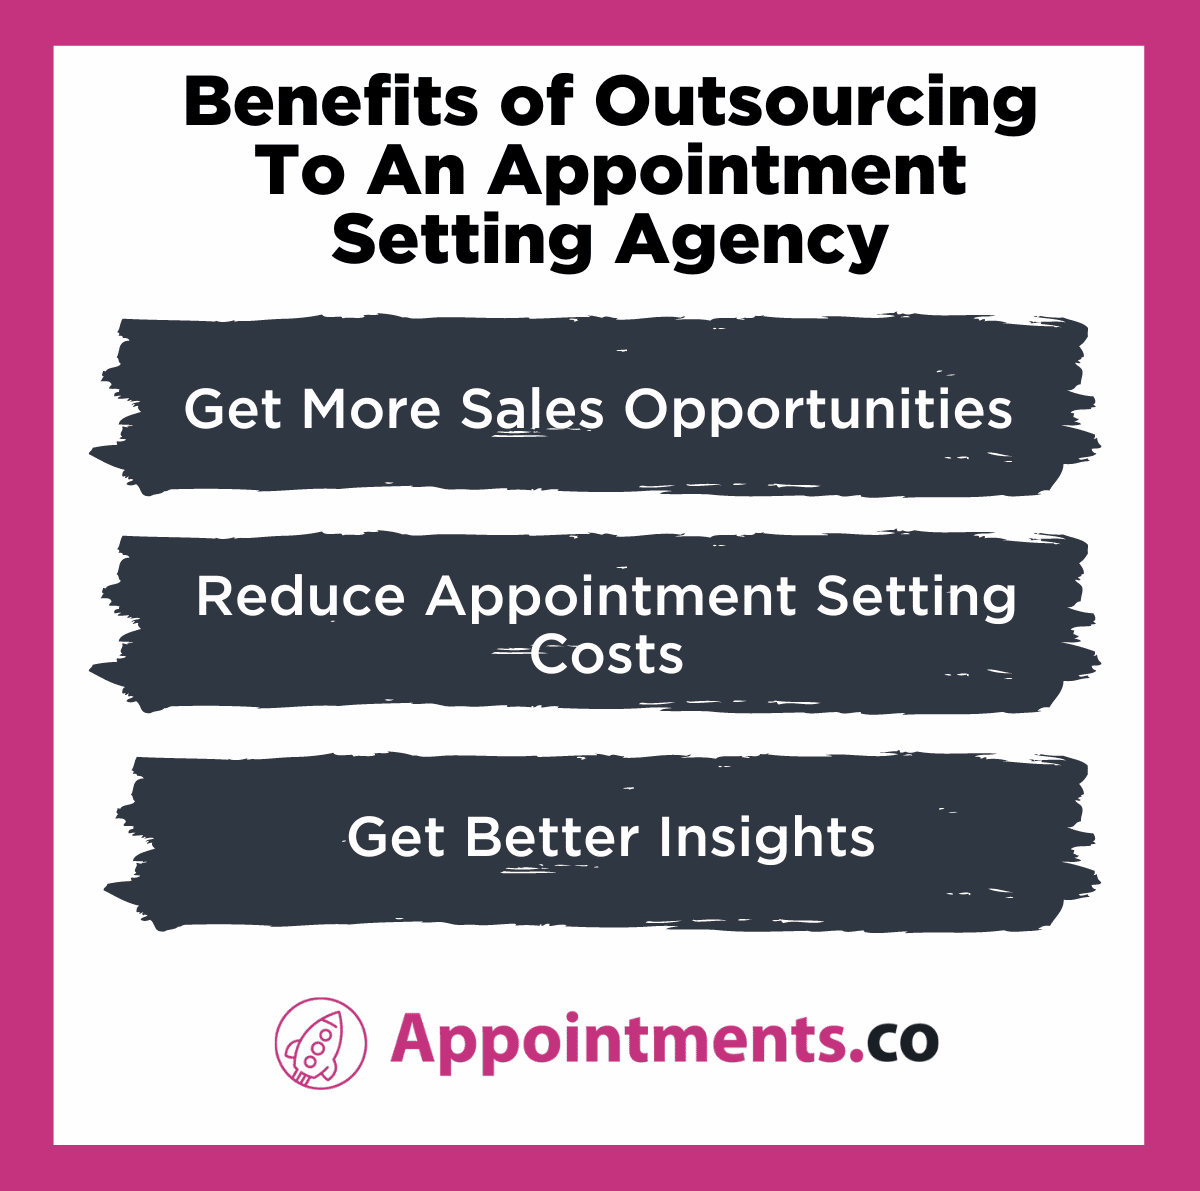 Benefits of Outsourcing To An Appointment Setting Agency